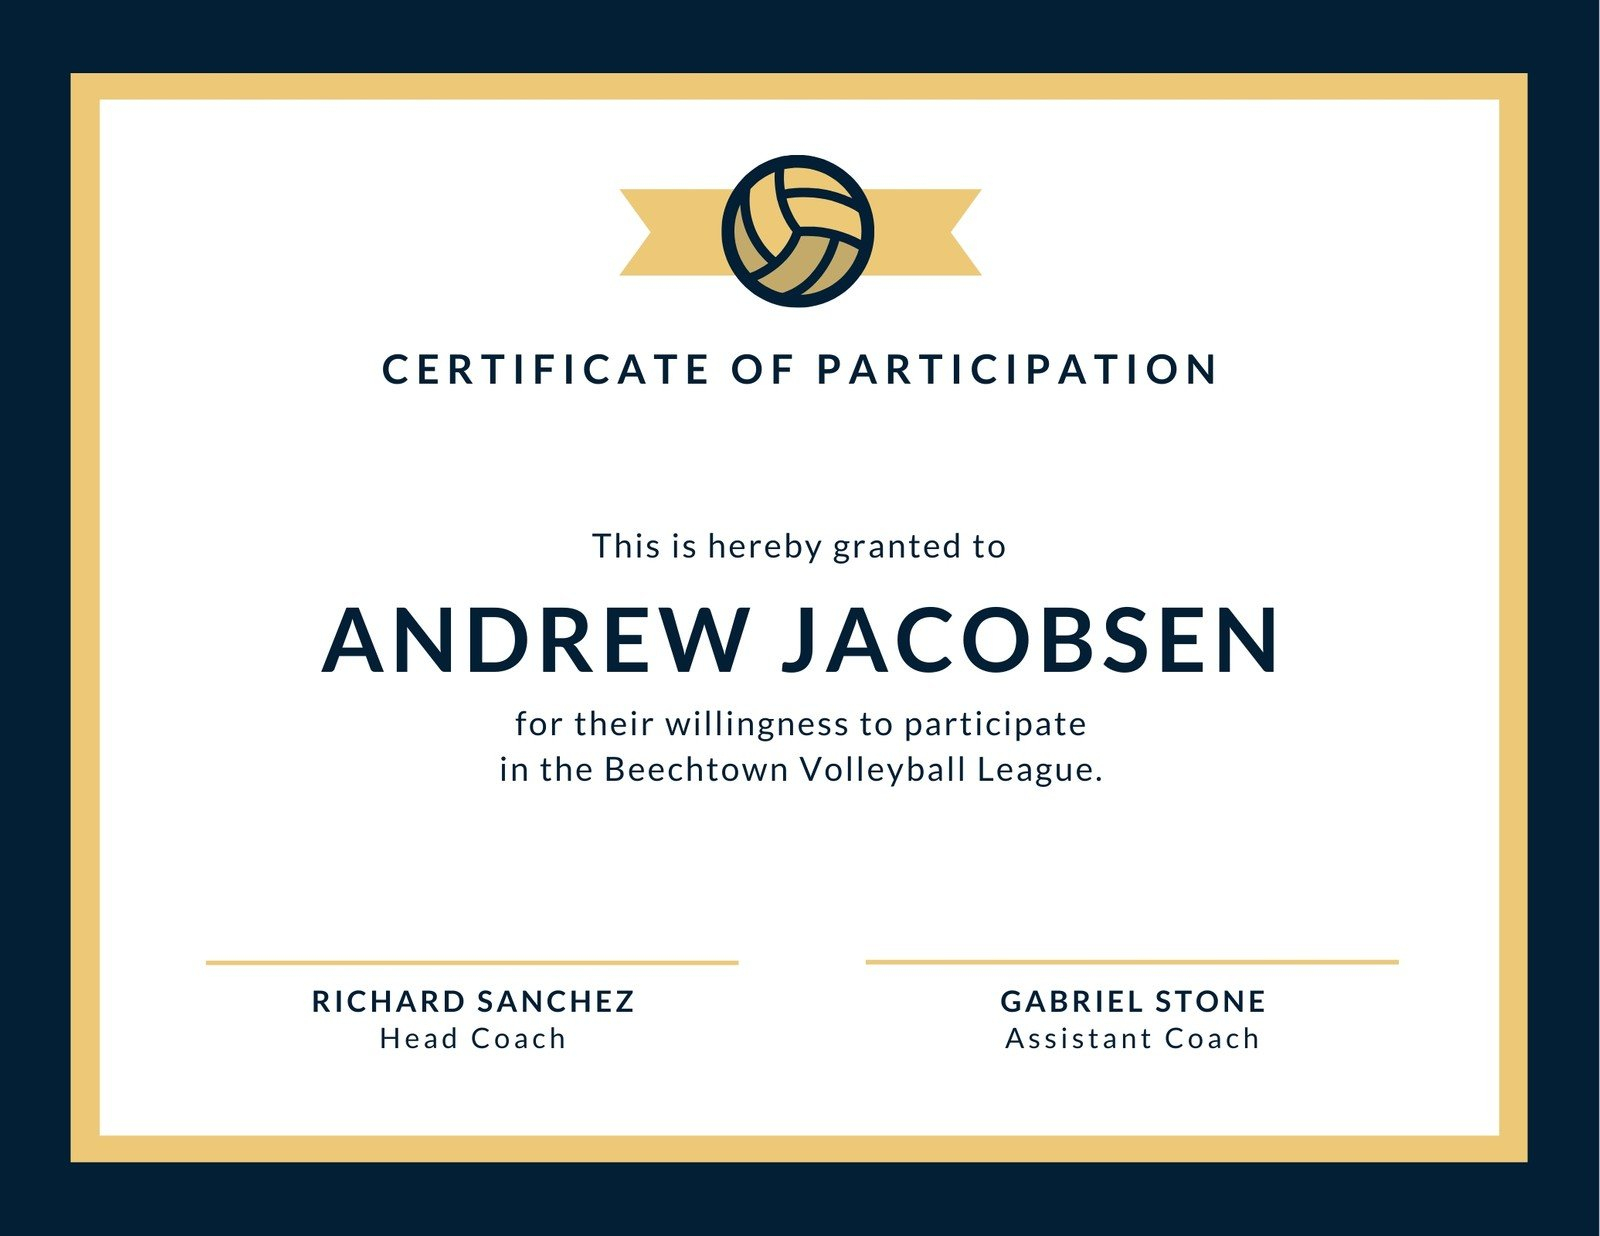 Free Printable, Customizable Sport Certificate Templates | Canva - Free Printable Volleyball Certificates Awards